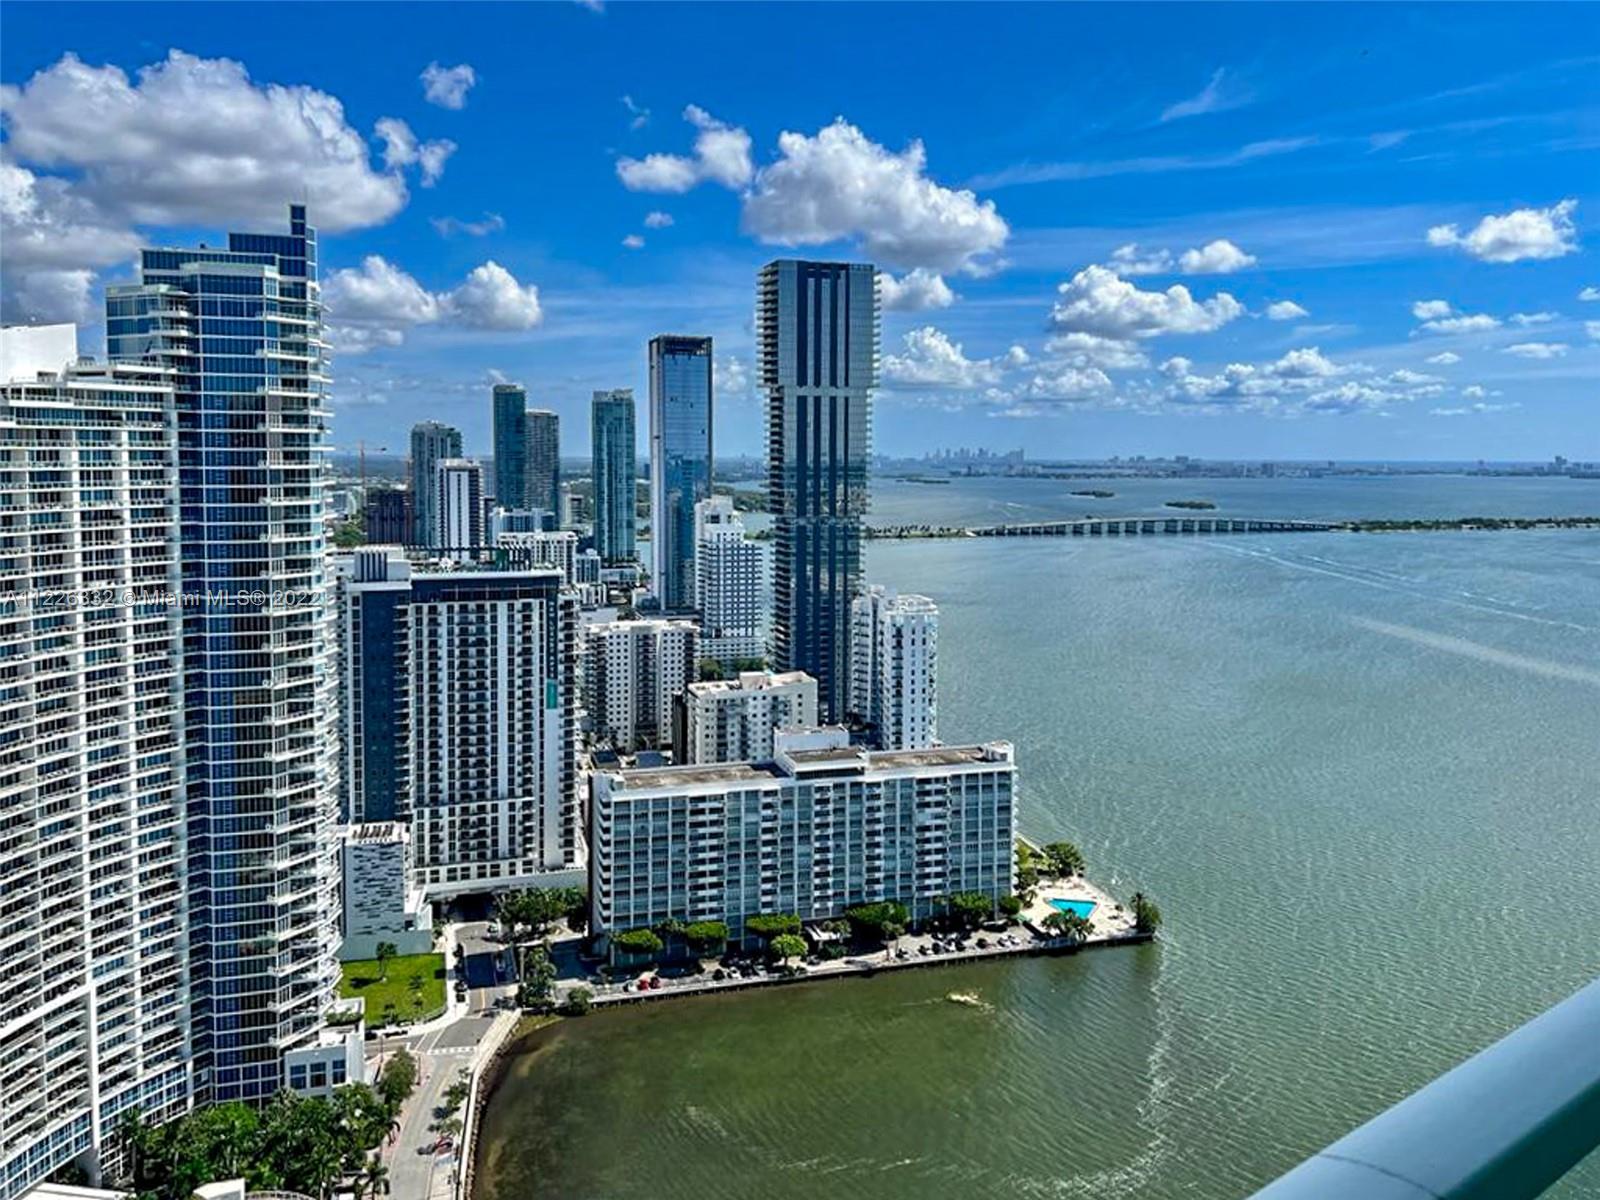 Spectacular high-floor 1Bedroom + DEN and 1BR unit with 2 parking spaces at Quantum on the Bay in Edgewater. Unit has Gorgeous views of Biscayne Bay & Miami  Beach.
Den can be used as a guest bedroom or an office. Building features: 2 pools, state of the art gym, enjoy amazing water views from the Bedroom and Living room. Modern large residents lounge area, theatre room, sauna, valet, convenient store and more...
Beautiful Margaret Pace Park across the street and restaurants just steps away from the building. Close to Downtown Miami, Midtown, Wynwood and .Design District.